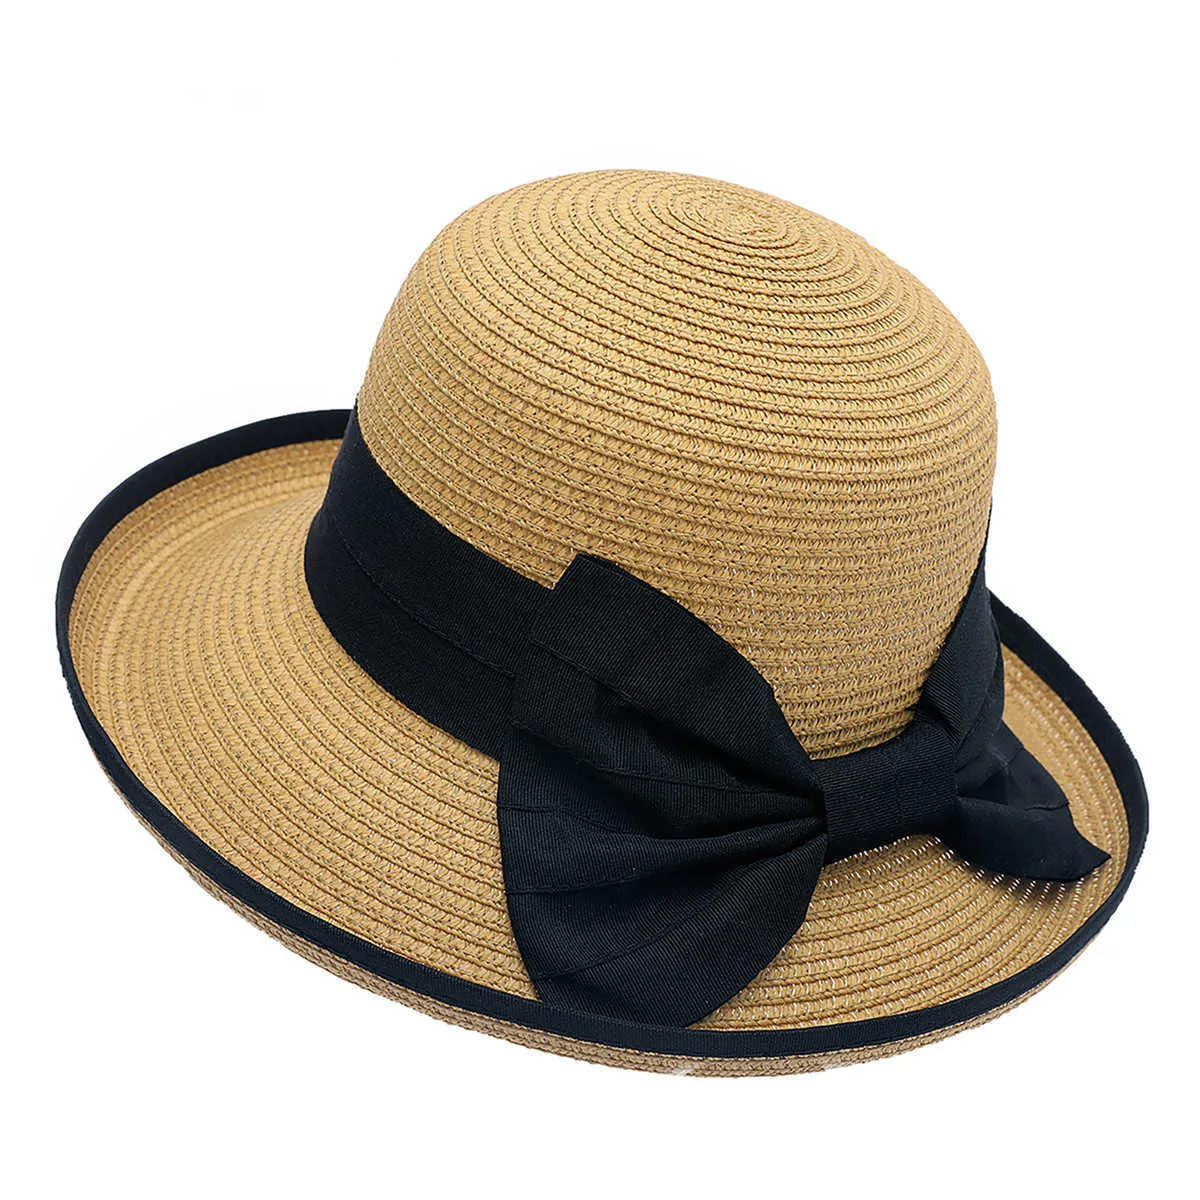 Summer Sun Floppy Sun Hat For Women Wide Brim Straw Floppy Sun Hat With  Ribbon Bow, Casual Flat Top Panama Floppy Sun Hat Fashionable And Feminine  G230227 From Sihuai06, $8.61